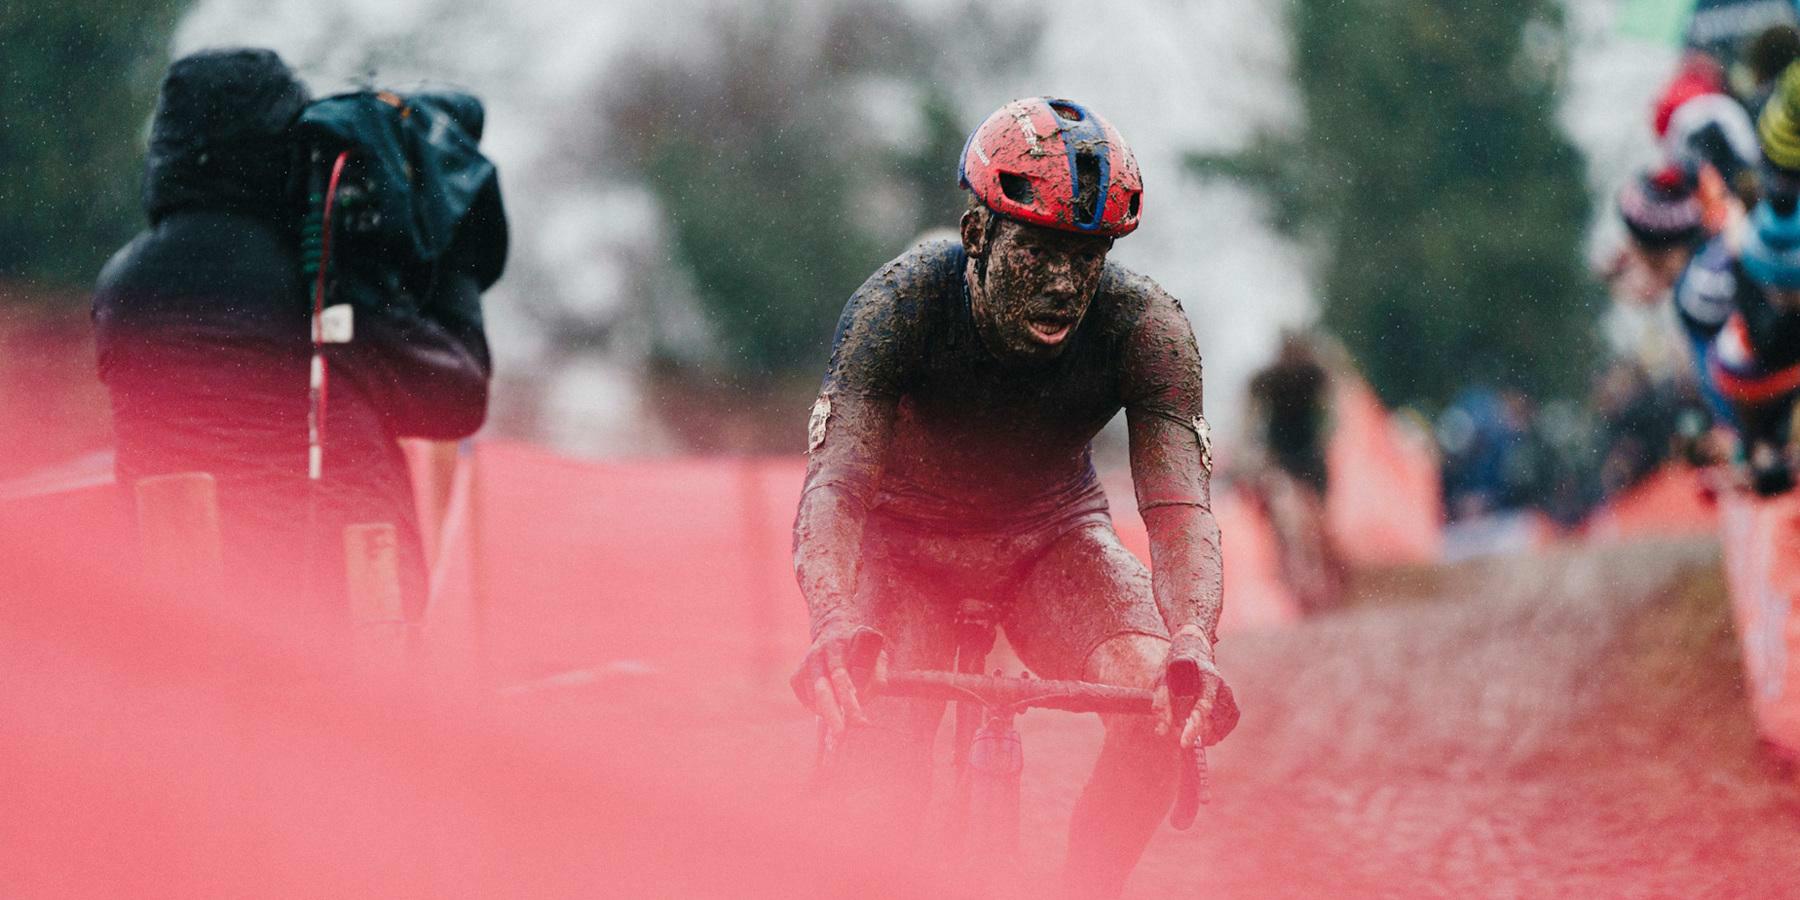 Ronhaar came out on top in Dublin's mud